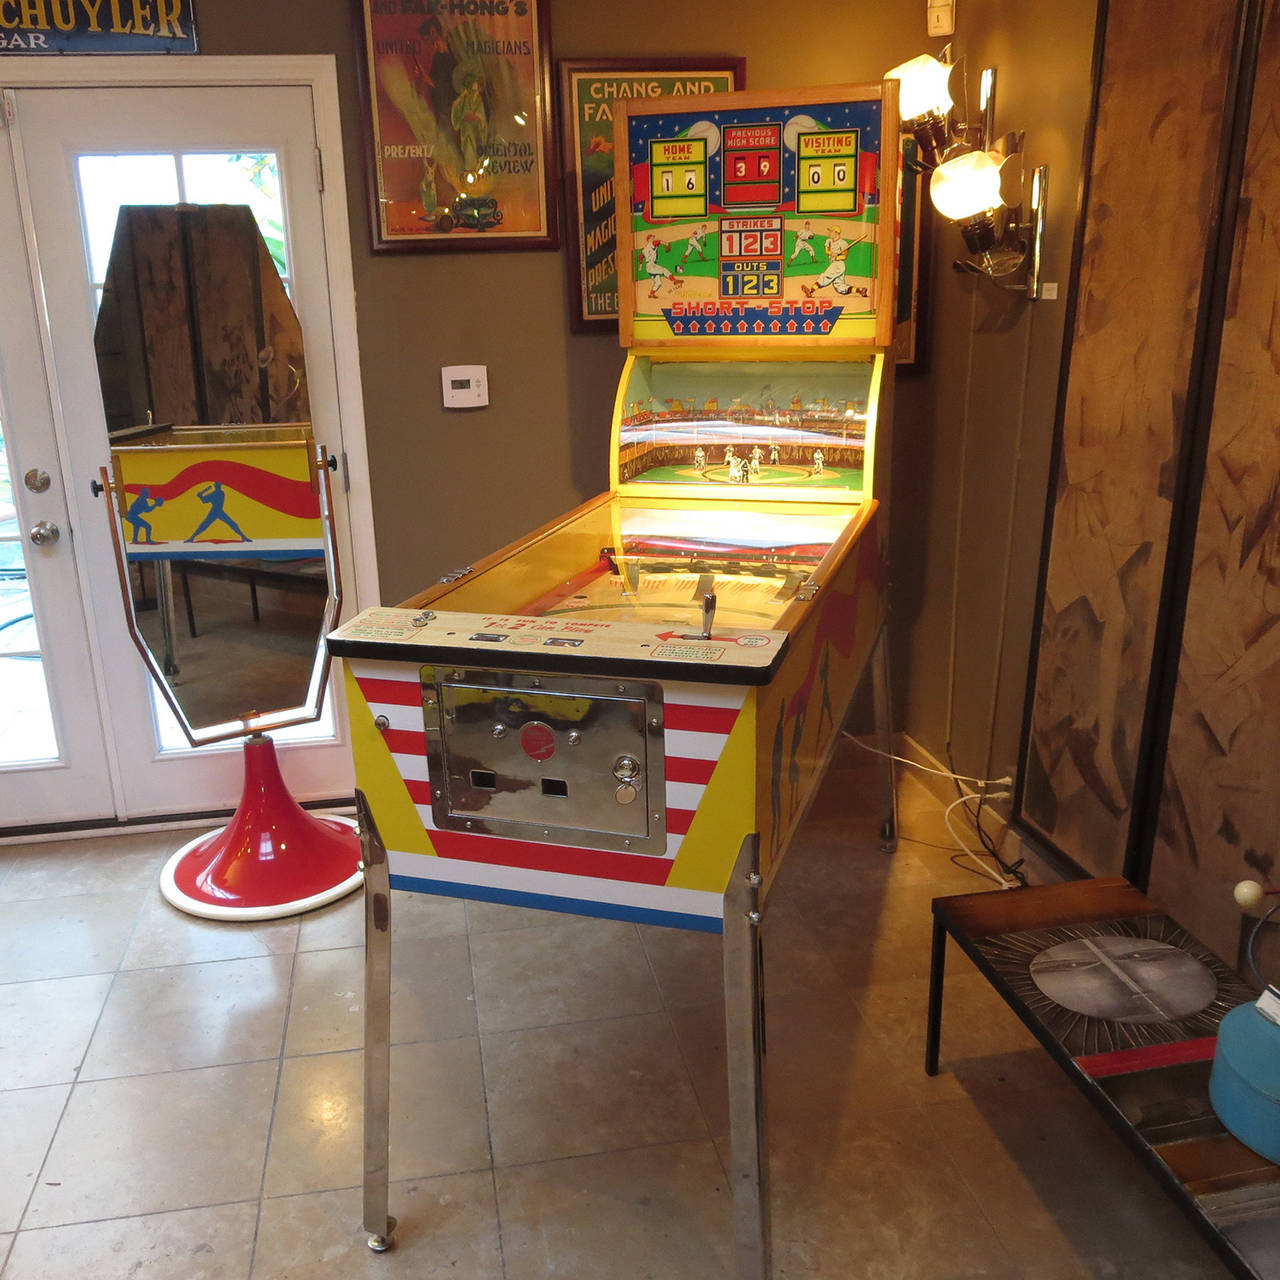 In a typical 1950's arcade, one would encounter mostly standard pinball games. There would be a few specialty machines, like shuffle bowling or the animated 